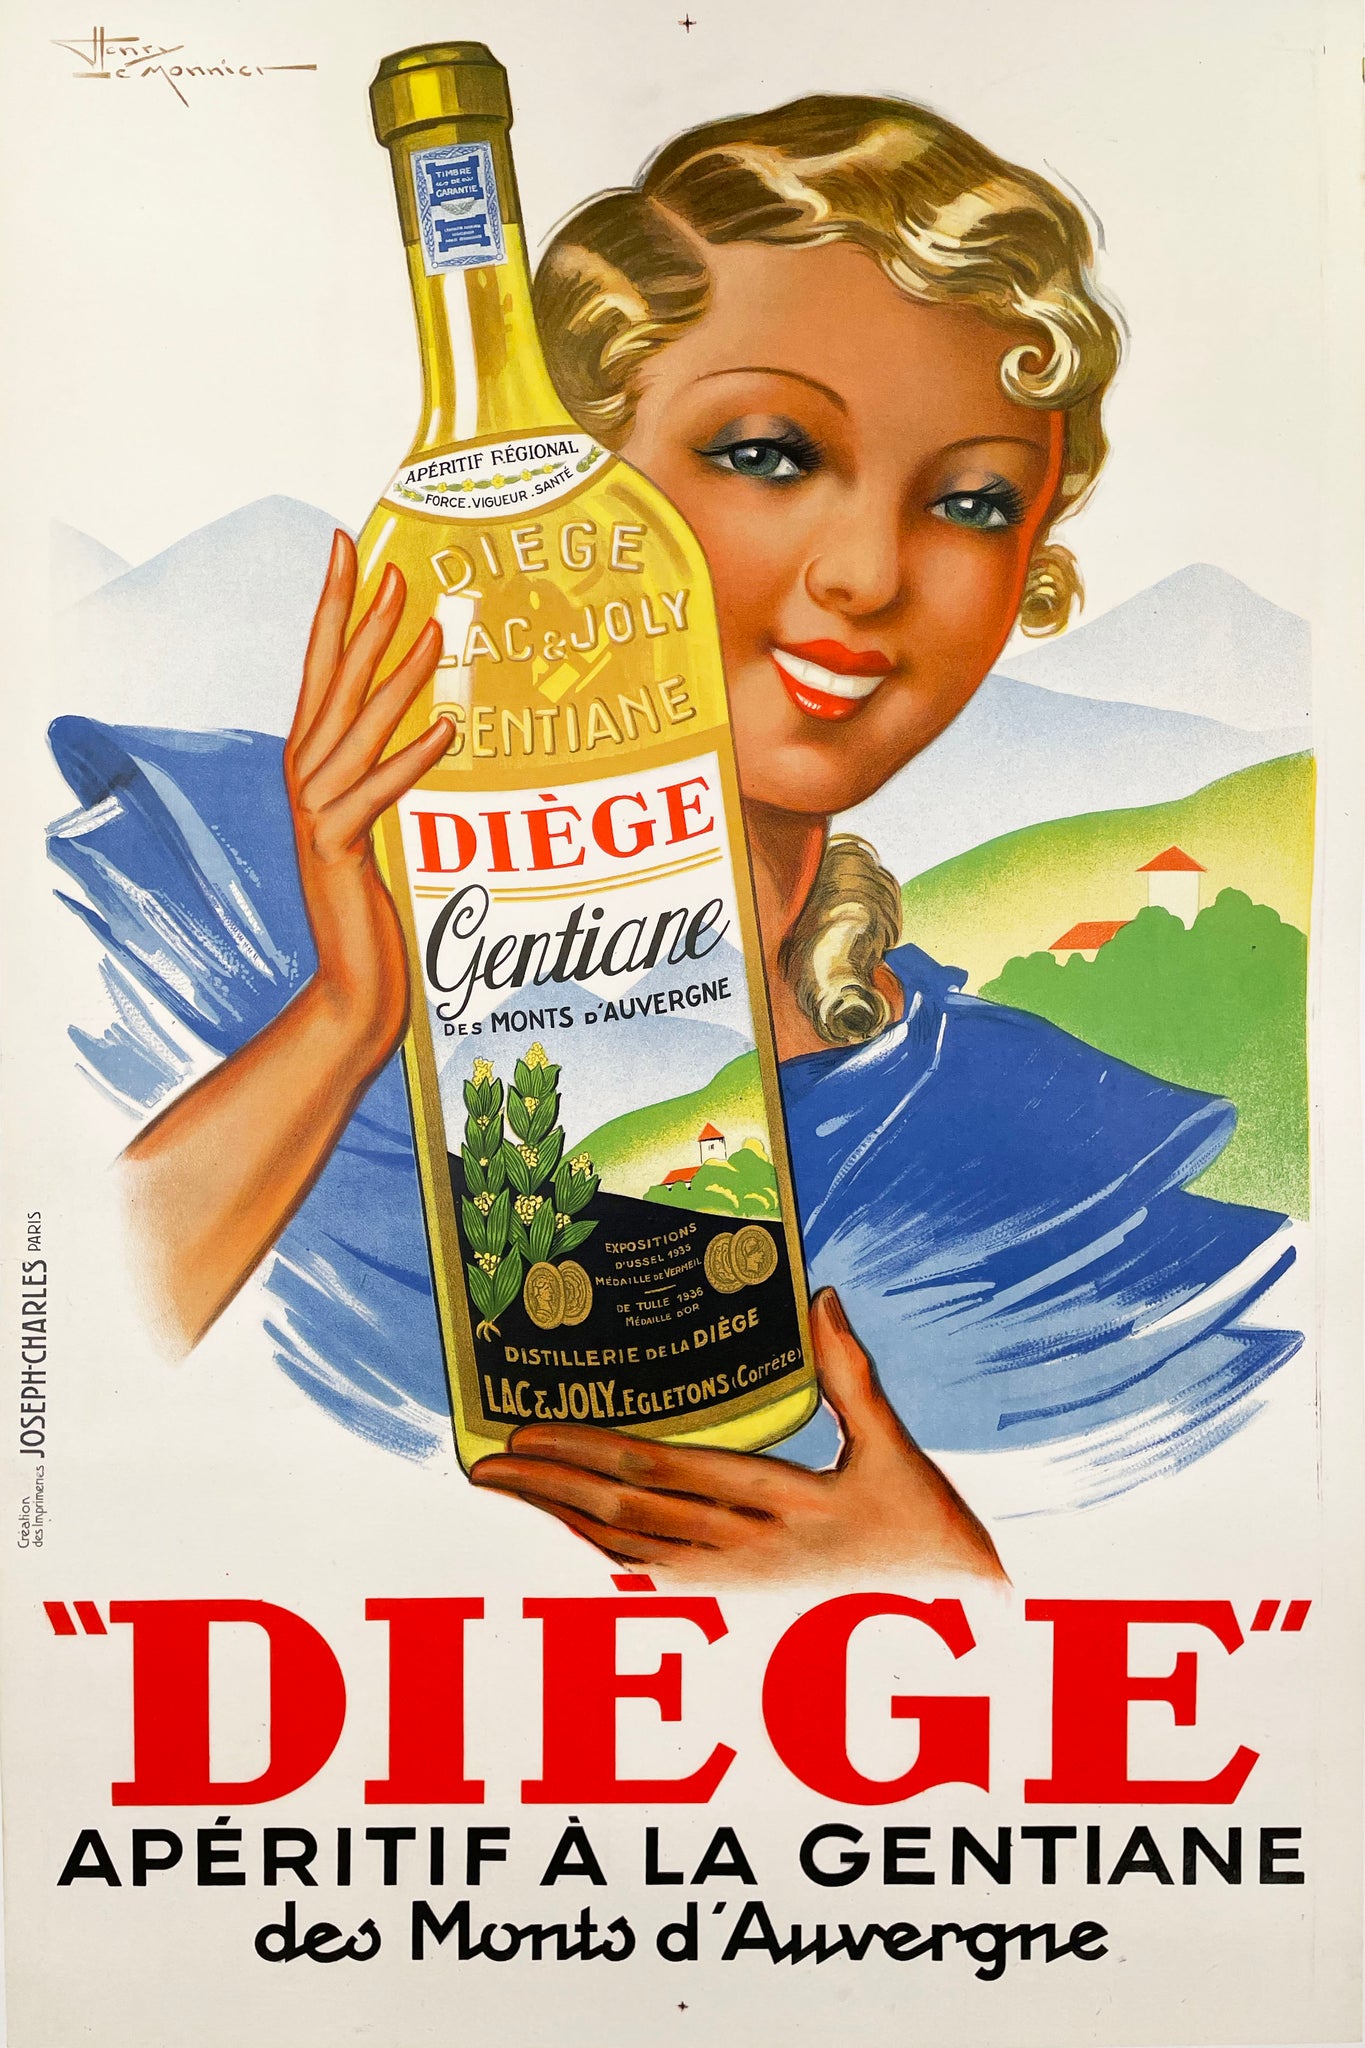 Diege Gentiane Aperitif - Vintage French poster by Le Monnier - 1936